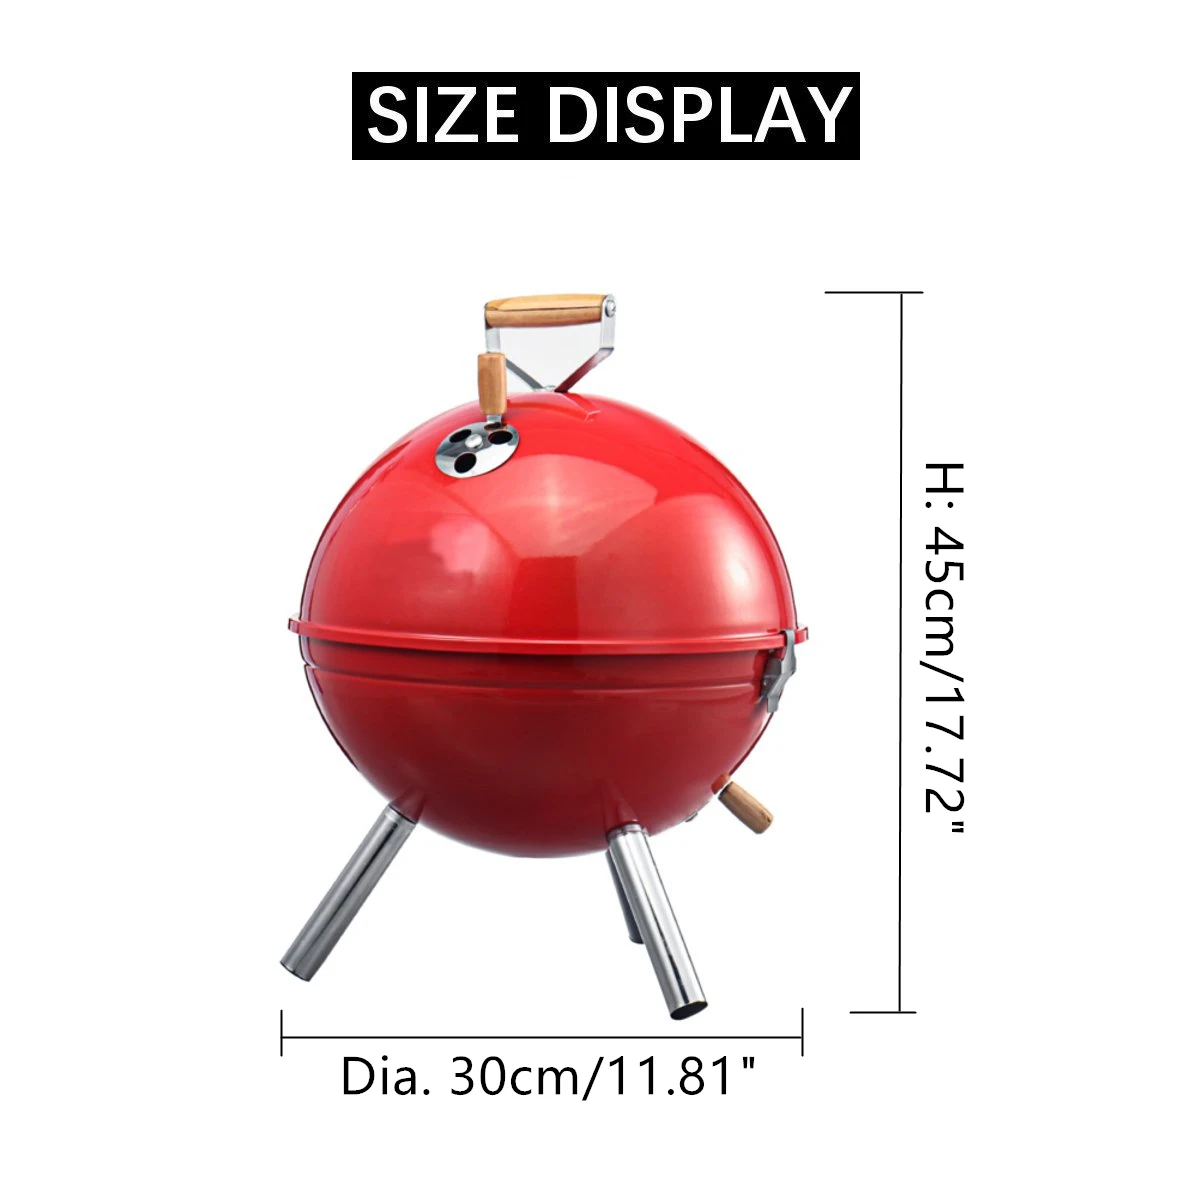 

Portable Iron BBQ Grill Stove Outdoor Camping Travel Charcoal Stove With Vent Barbecue Burning Oven BBQ Tools BBQ Kettle Grills